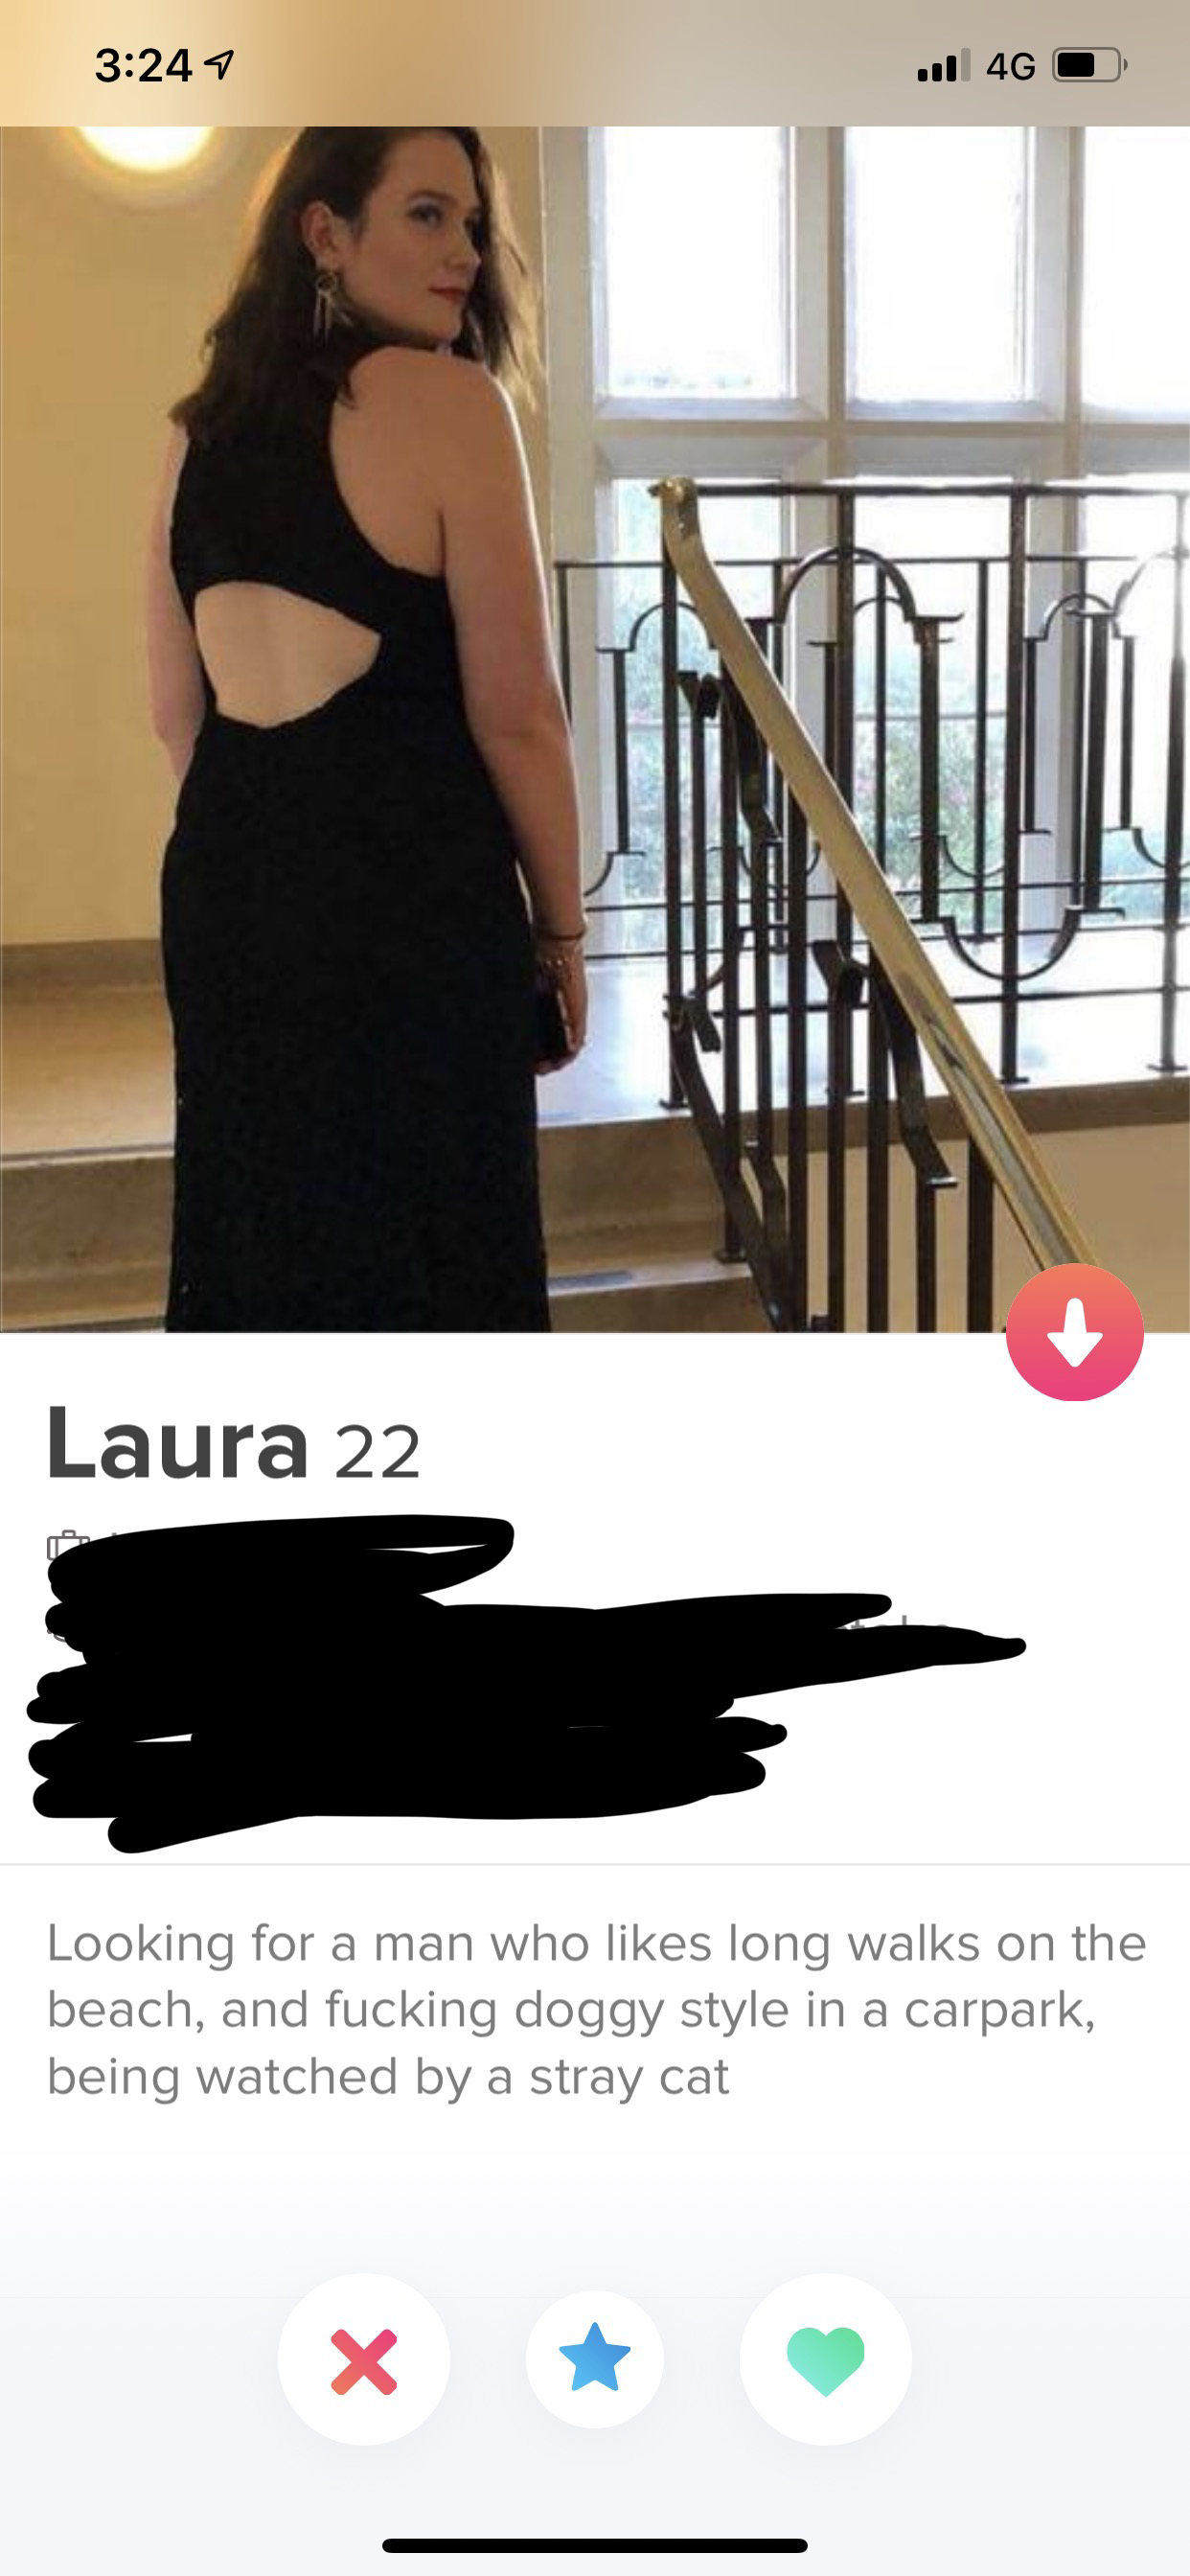 Shameless Tinder profile that says Looking for a man who long walks on the beach, and fucking doggy style in a carpark being watched by a stray cat